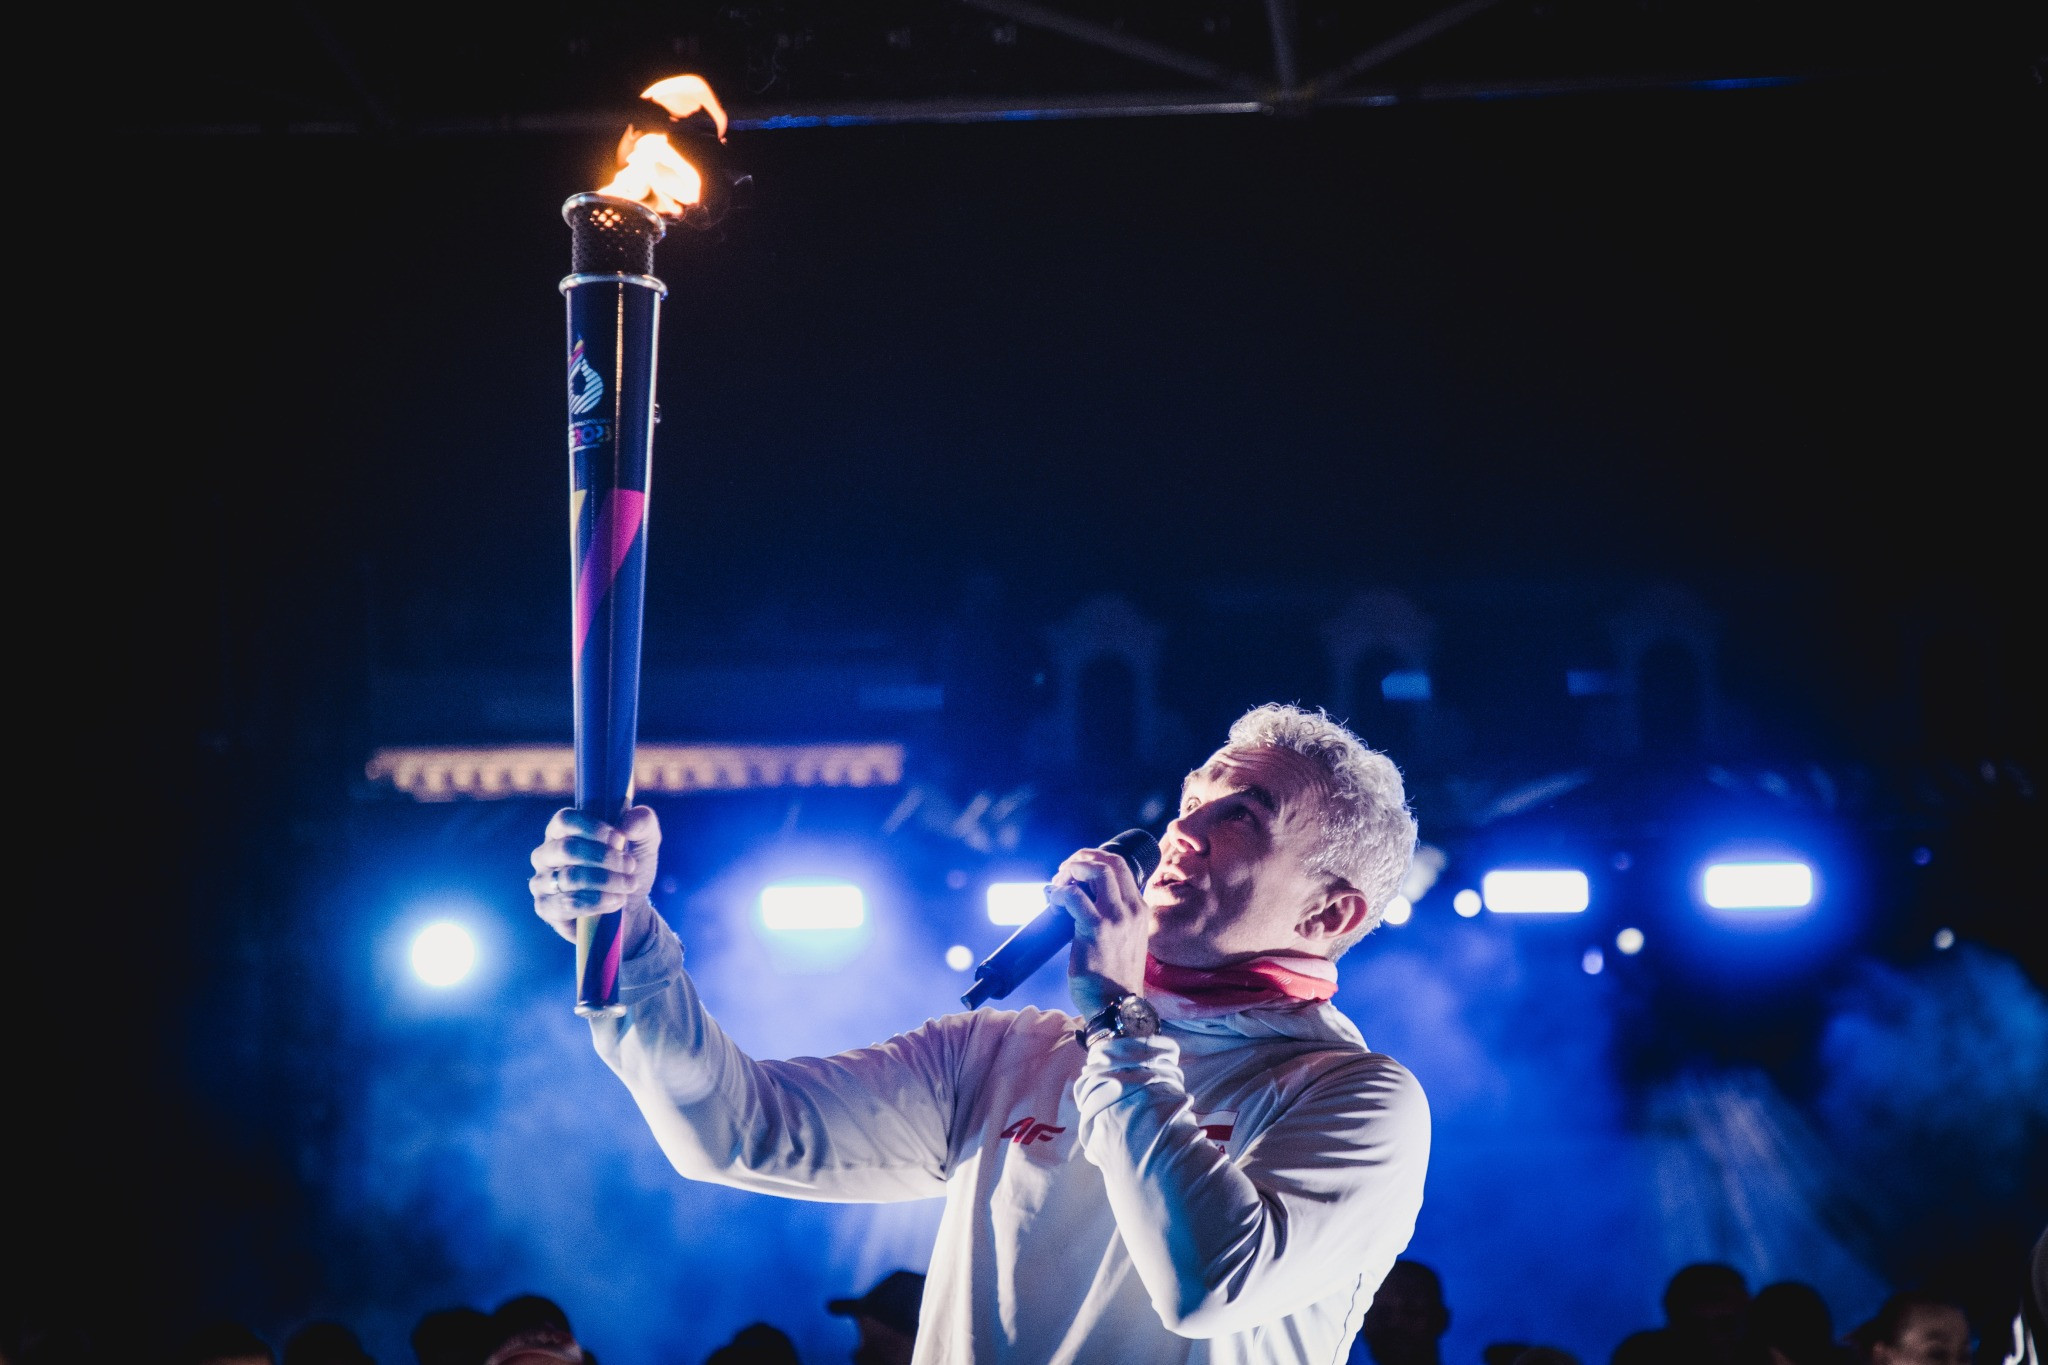 European Games 2023 Flame of Peace shown in host city Kraków for first time